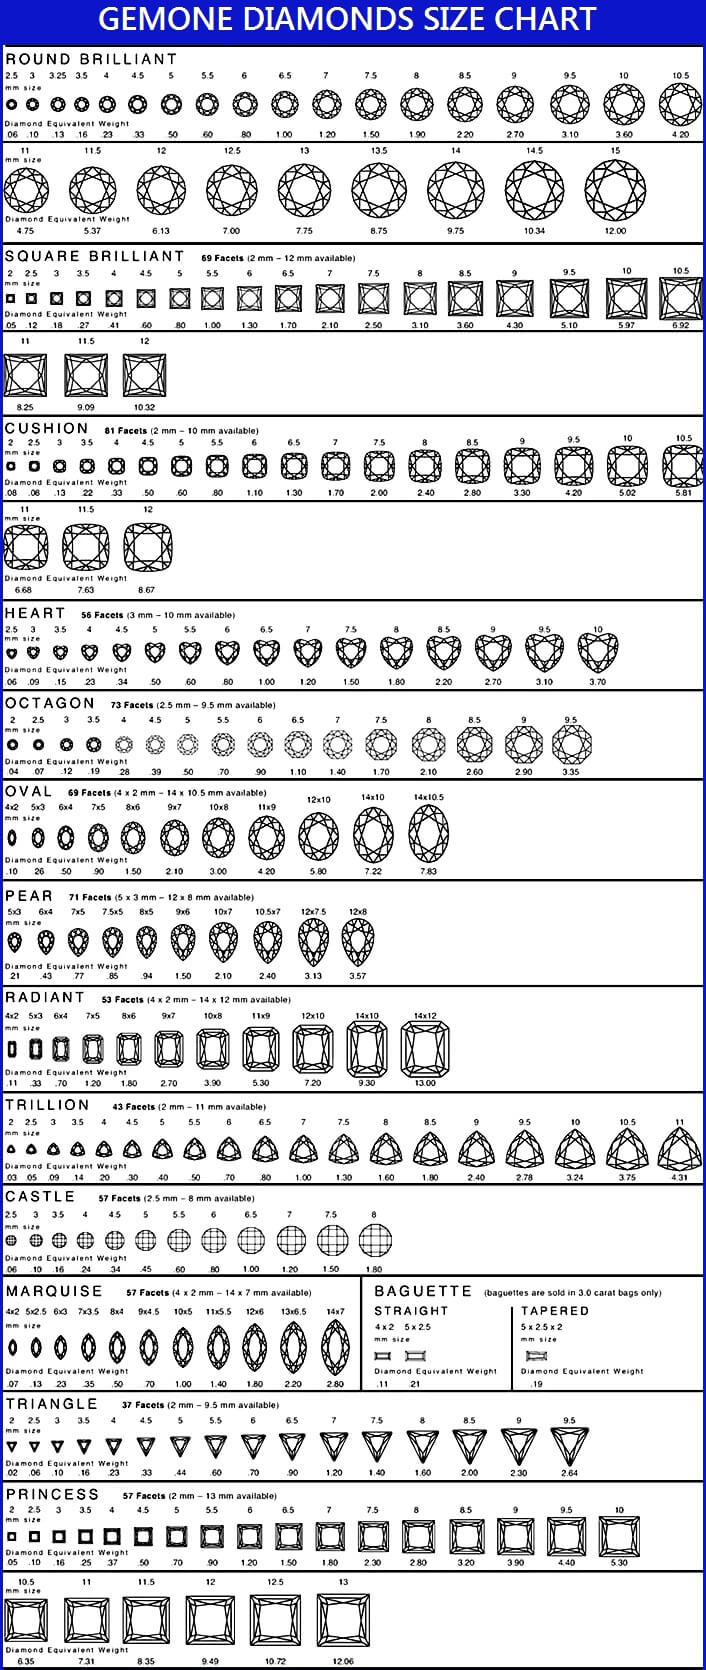 25 Free Printable Diamond Size Charts in MM (by Shapes)